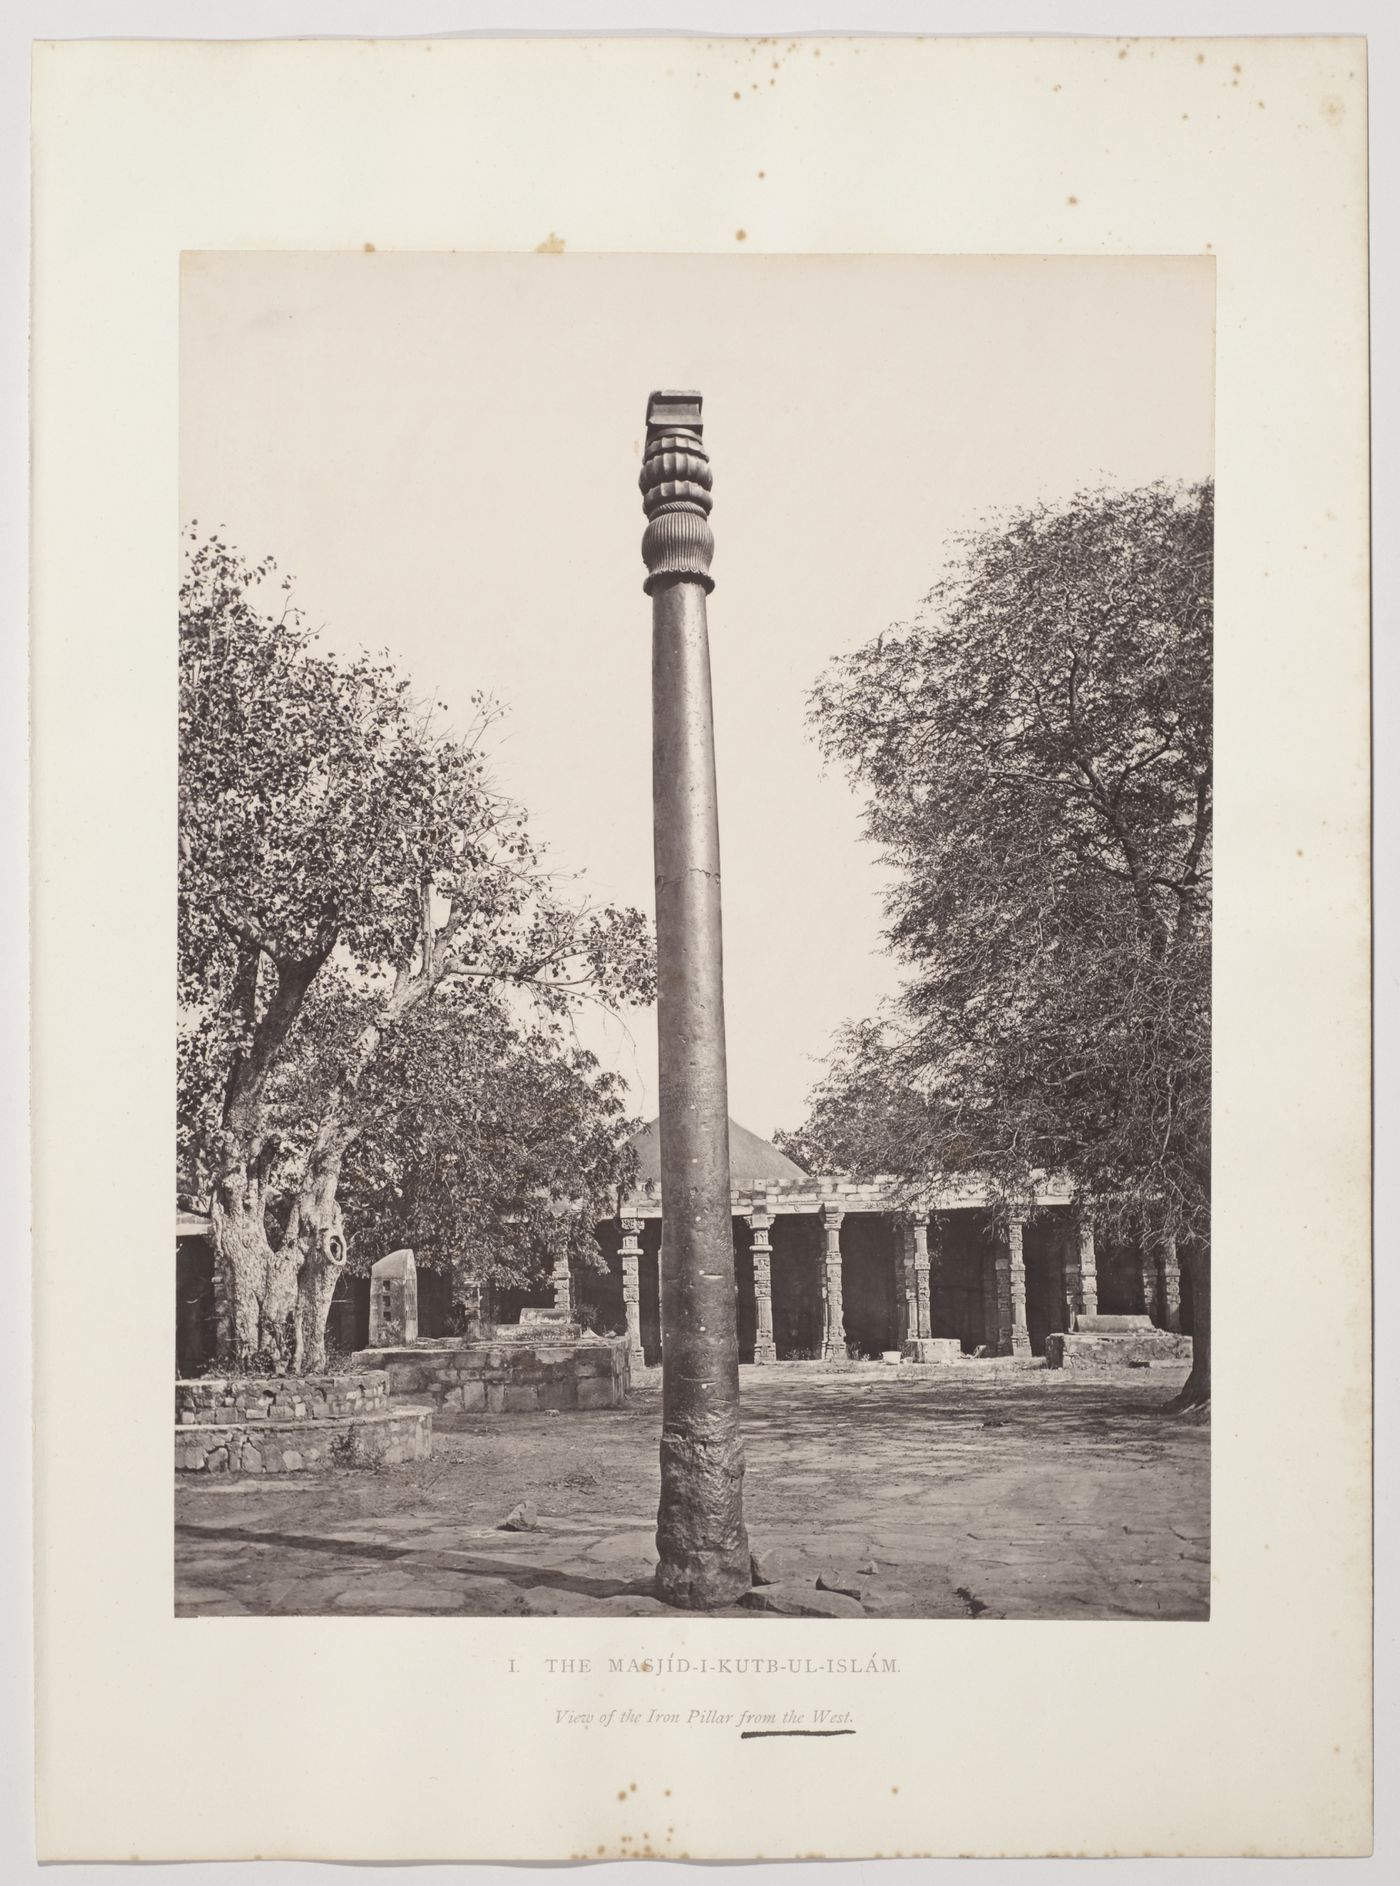 View of the Iron Pillar with the courtyard and colonnade of the Quwwat al-Islam [Might of Islam] Mosque in the background, Quwwat al-Islam Mosque Complex, Delhi, India